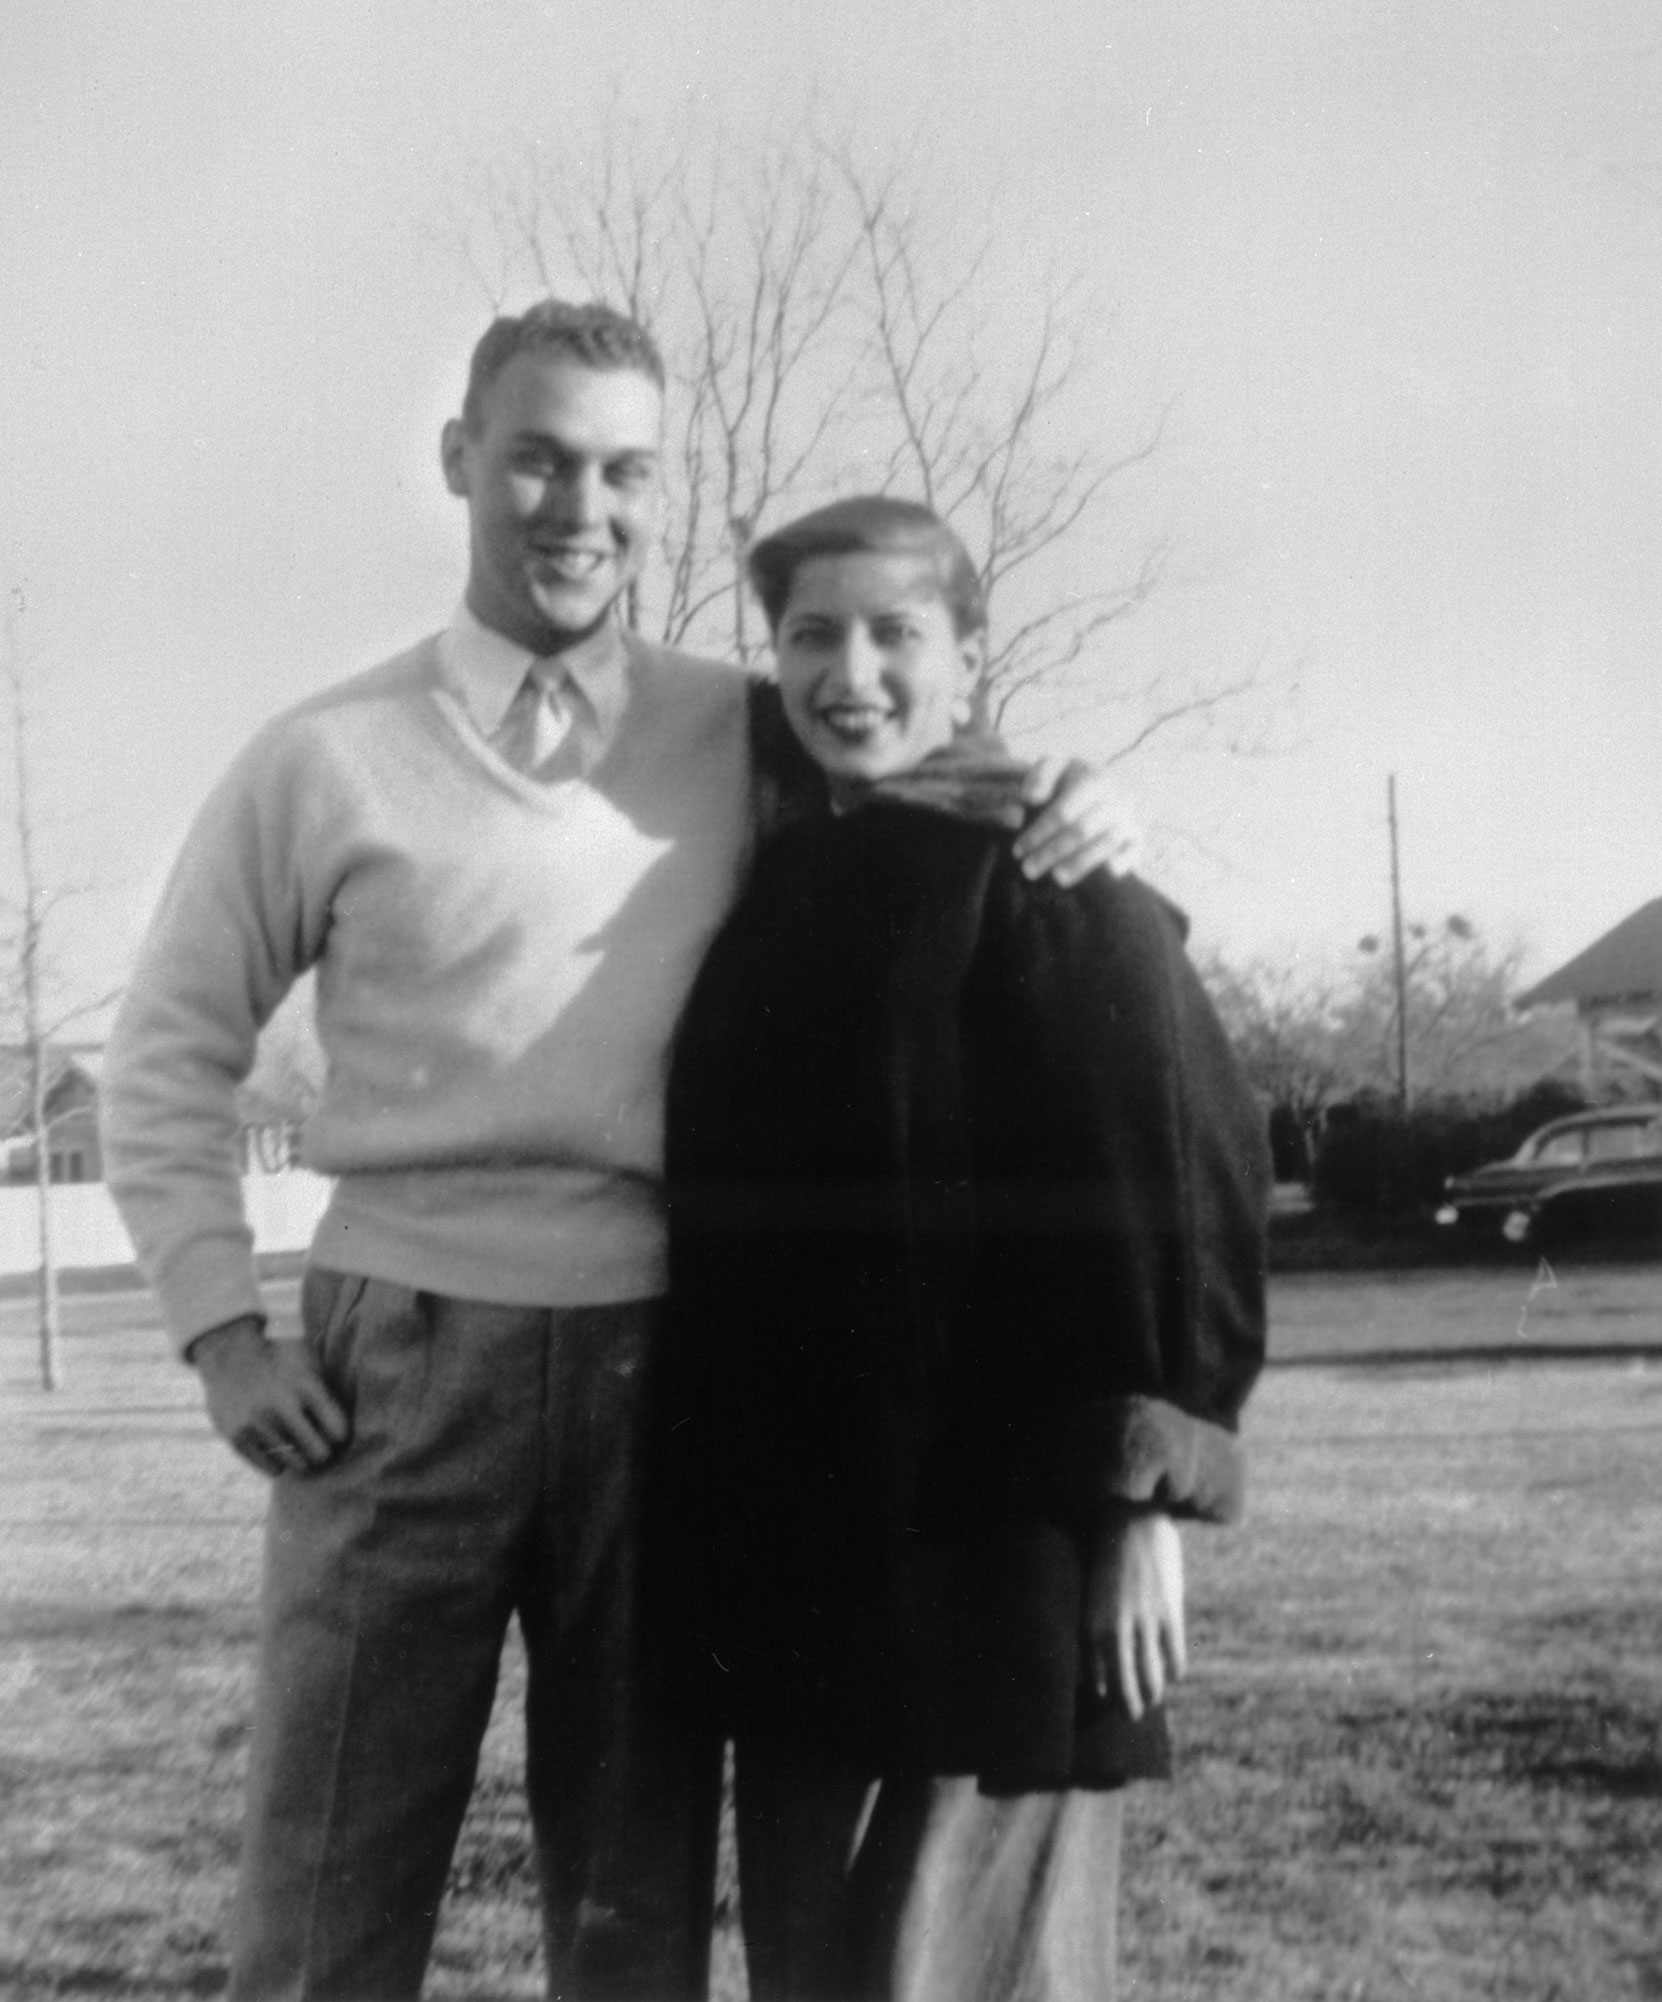 Martin D. Ginsburg and Ruth Bader Ginsburg in the fall of 1954 when Martin was serving in the Army. (Collection of the Supreme Court of the United States)